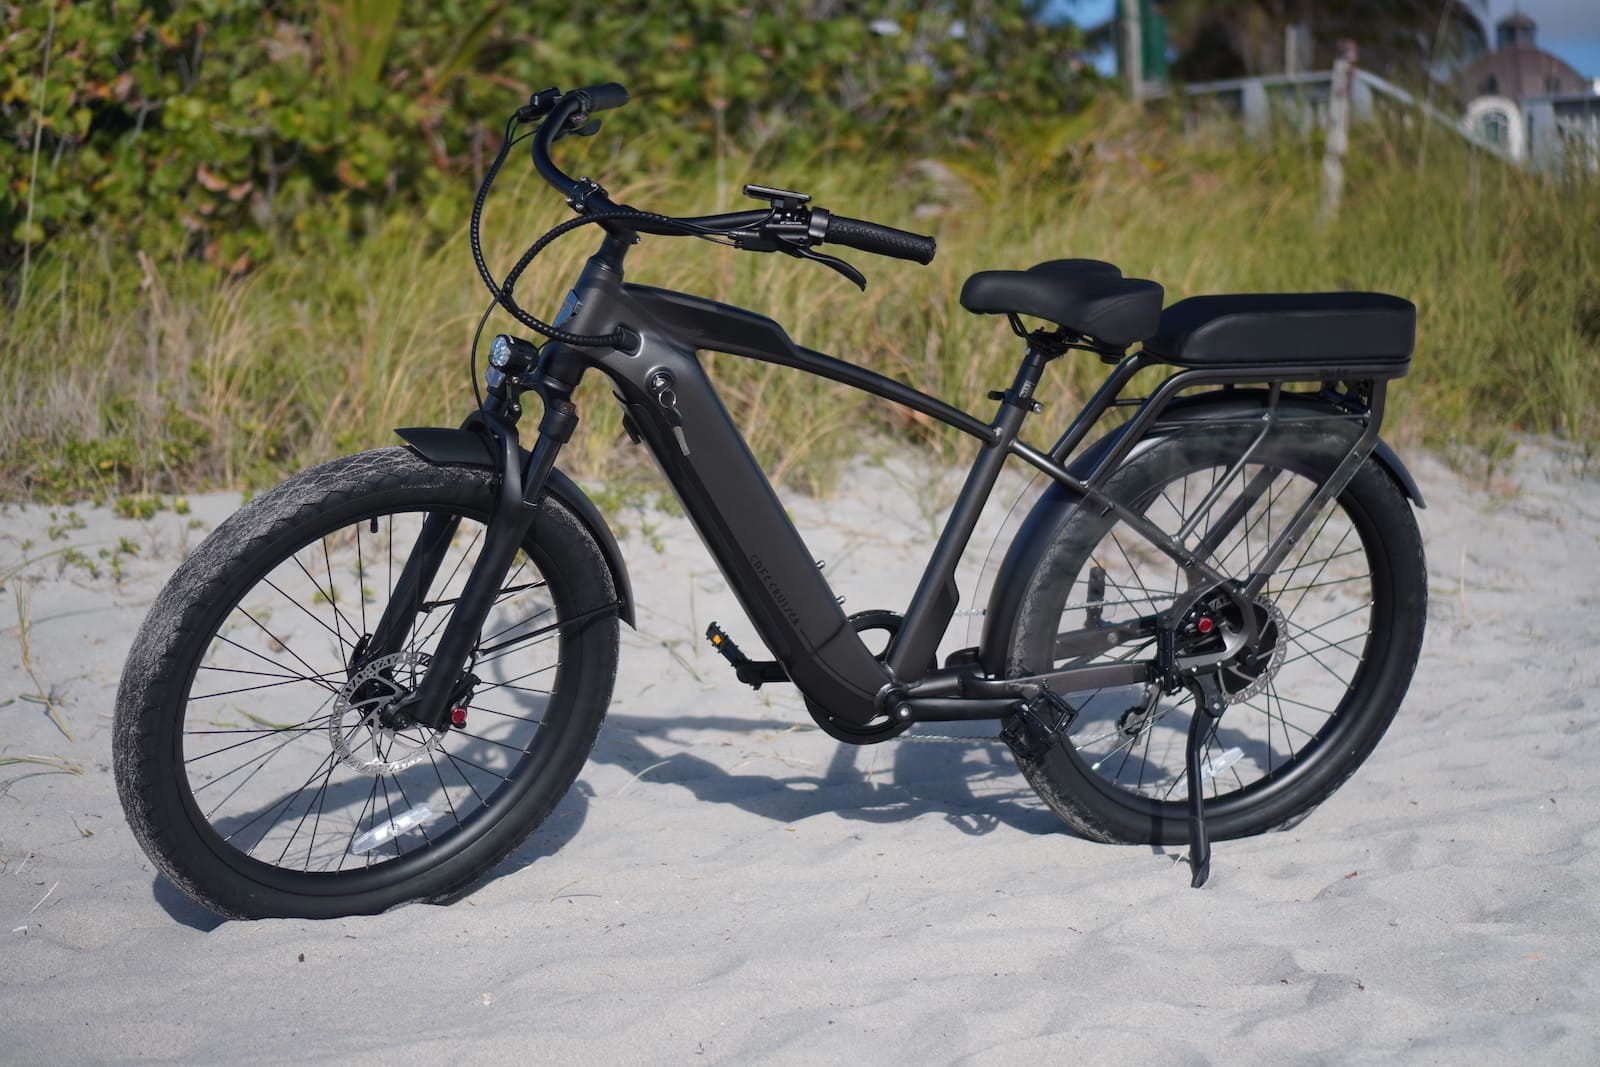 ride1up cafe cruiser electric bike review 13 - Auto Recent